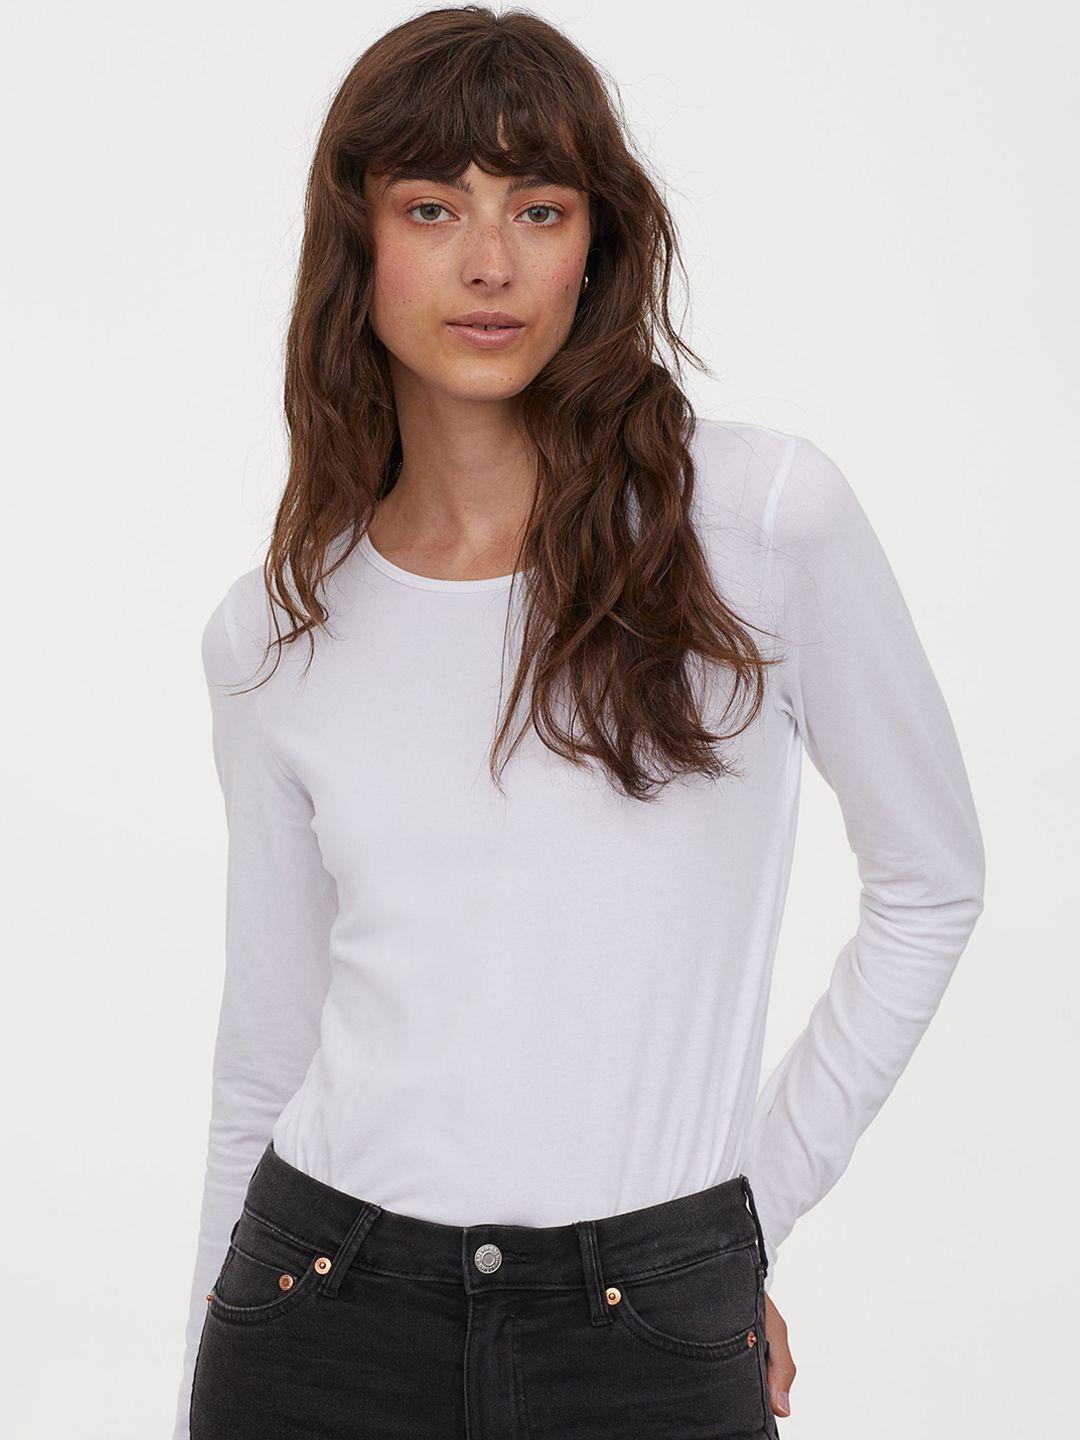 h&m women white solid long-sleeved jersey top